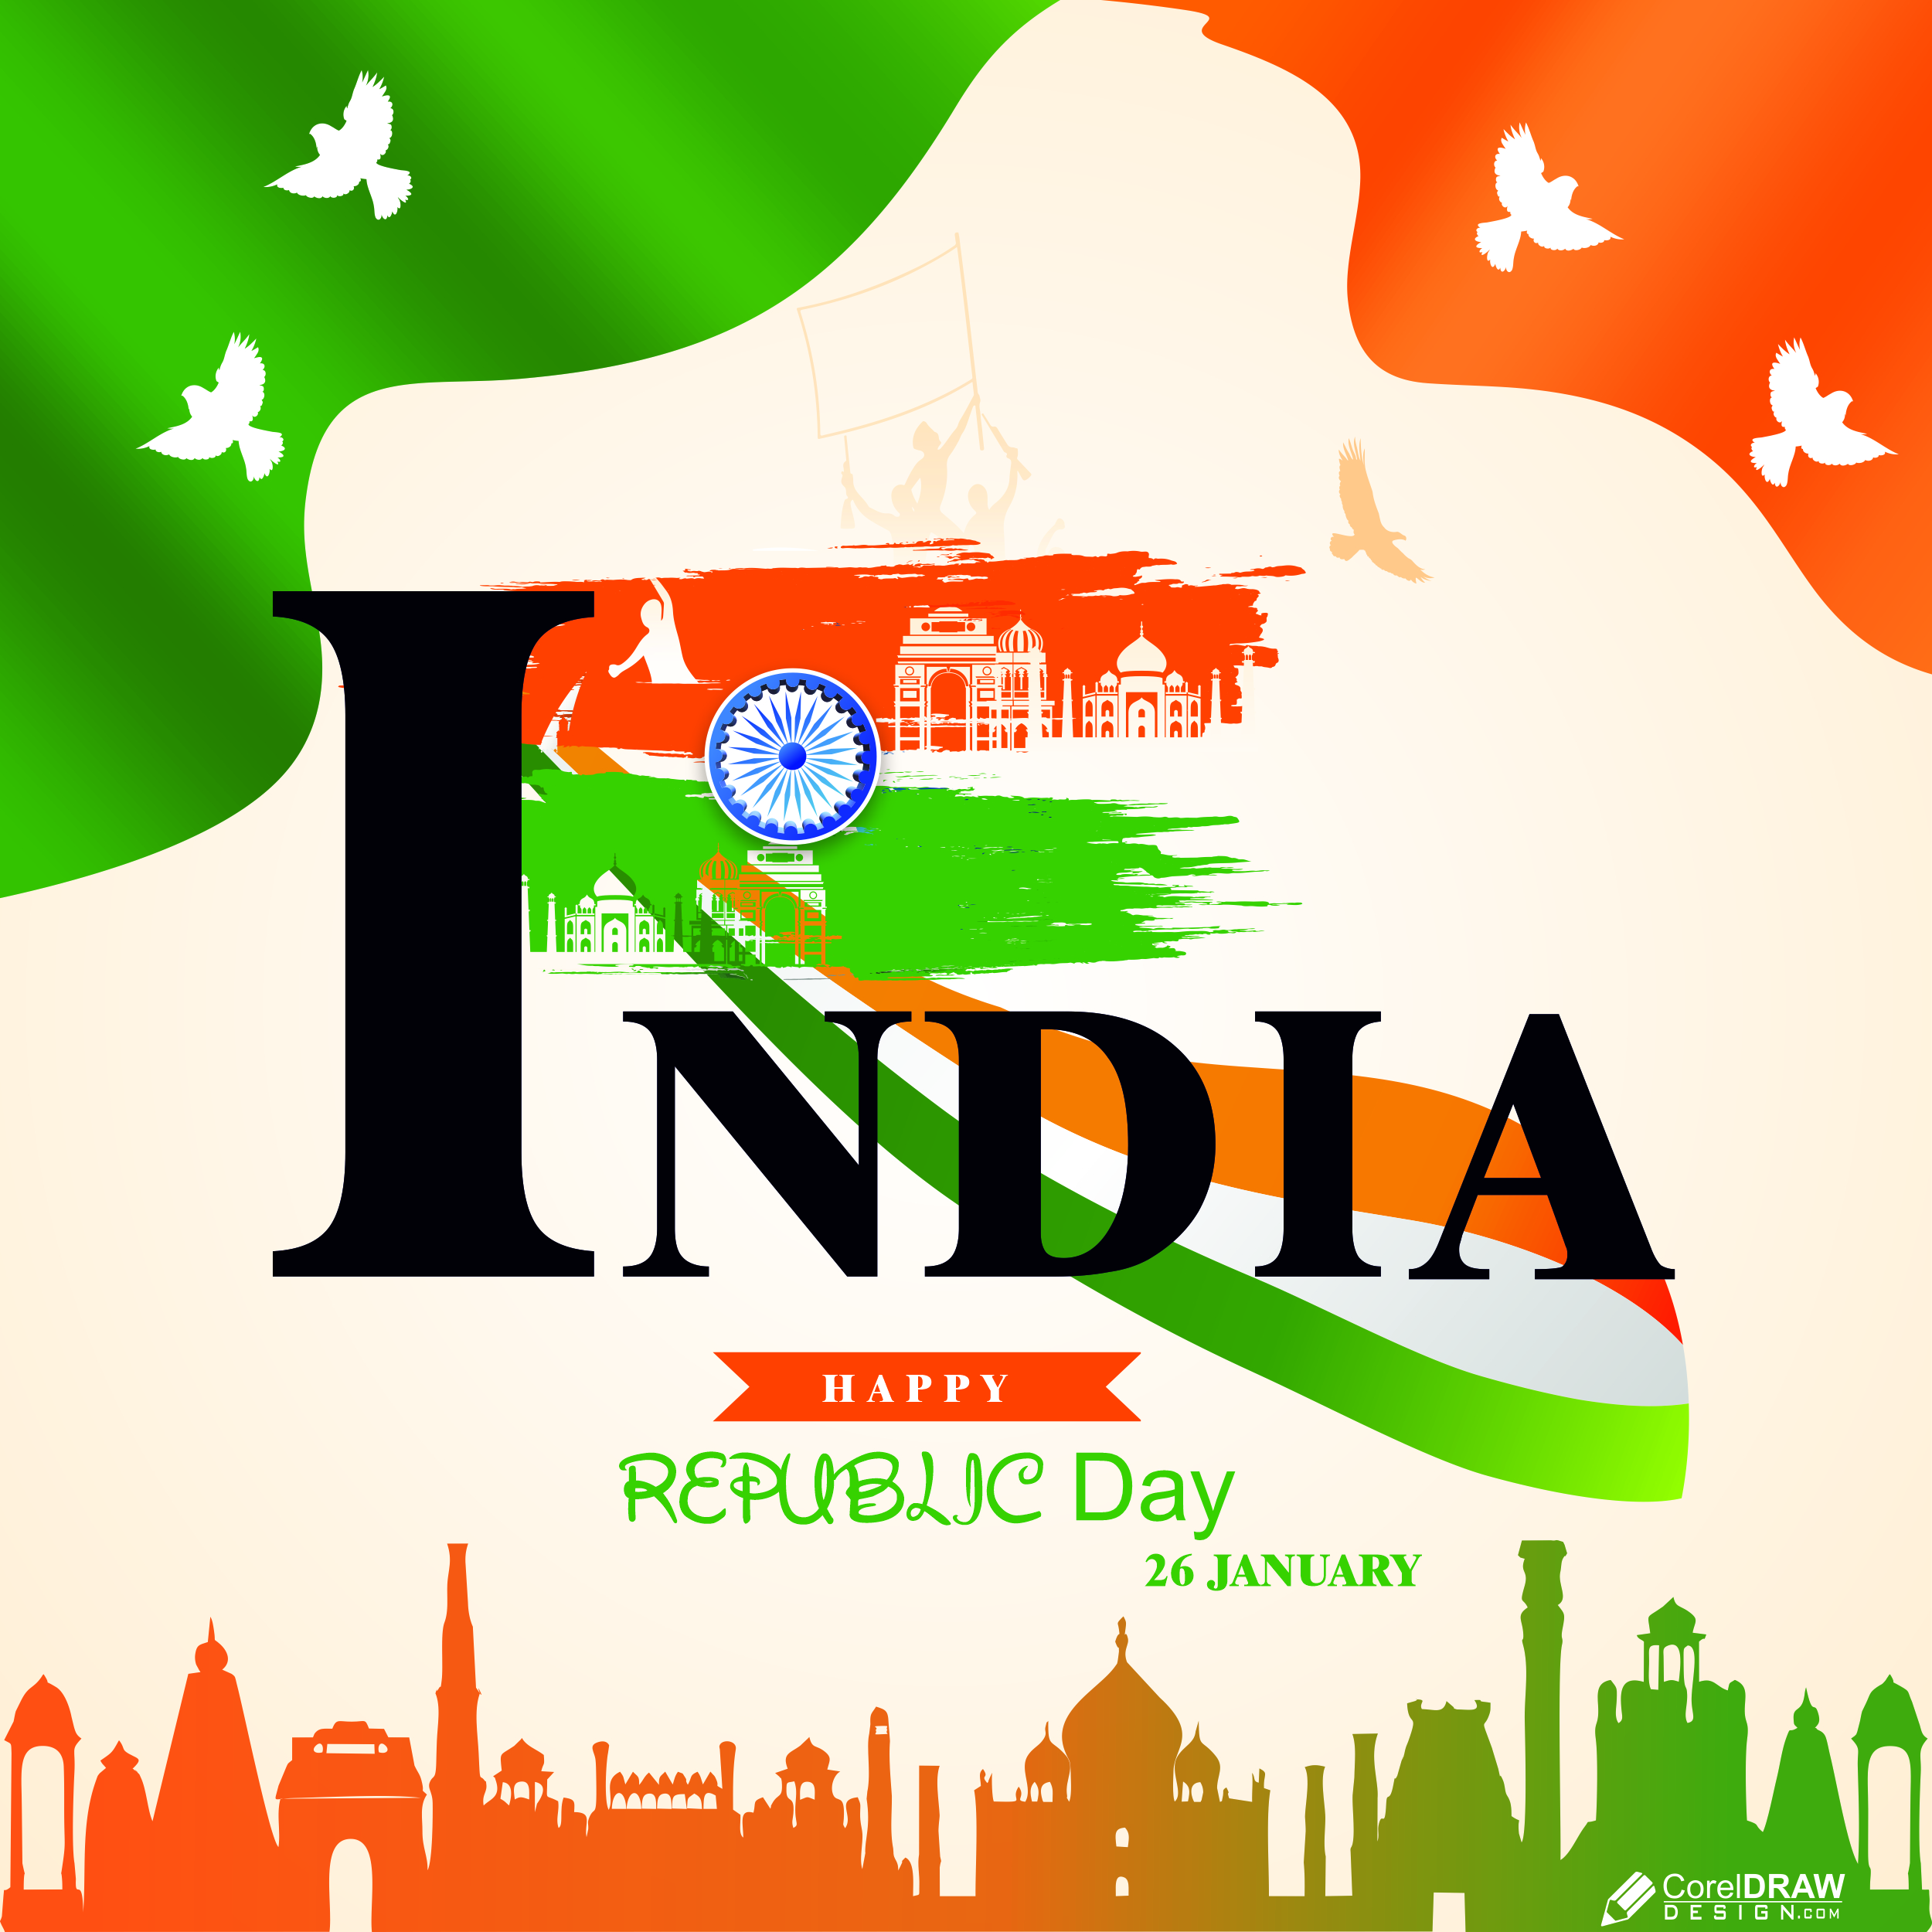 Republic Day Drawing | republic Day Poster | how to draw 26 January drawing  easy steps - YouTube